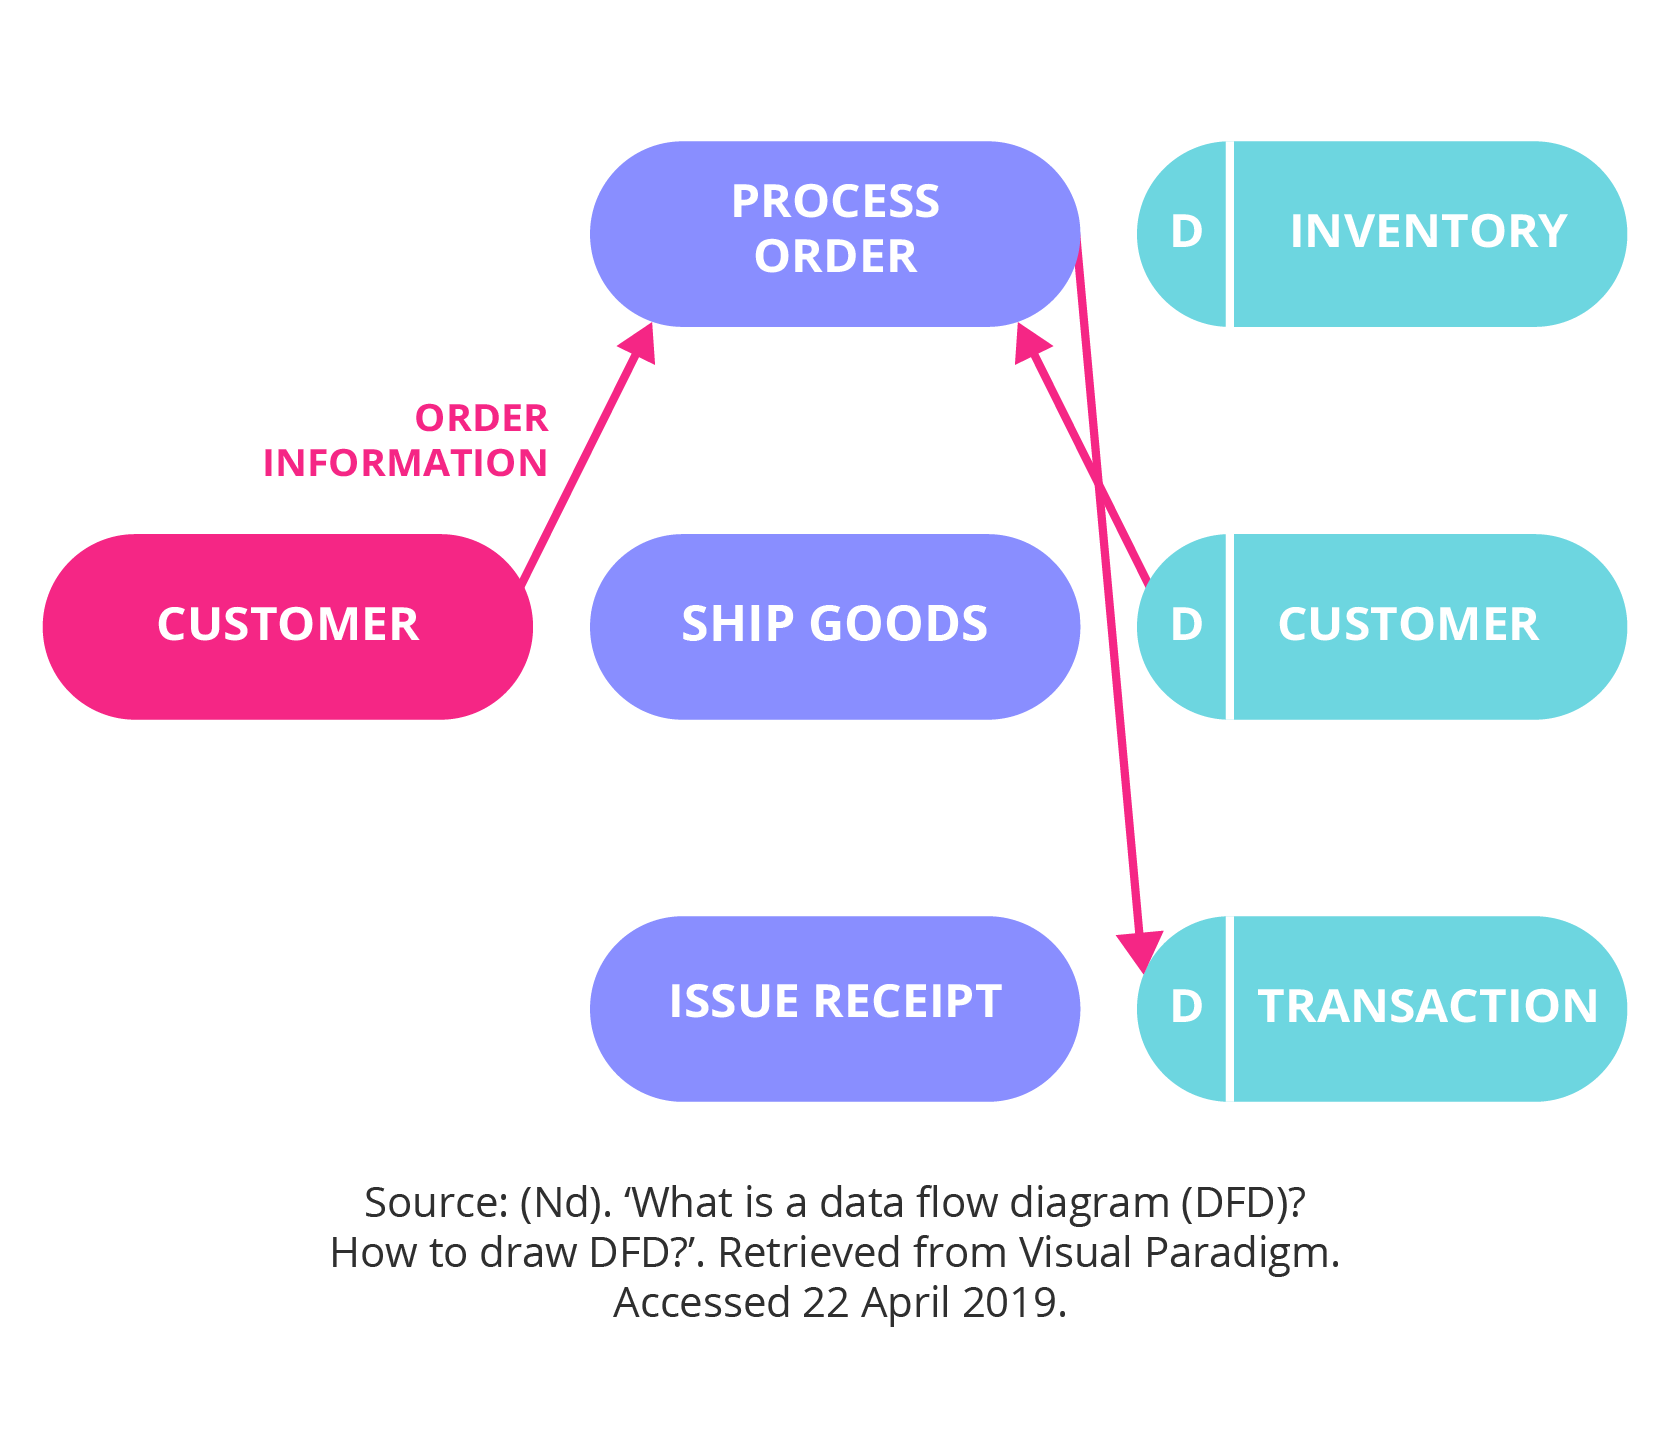 different types of business process model